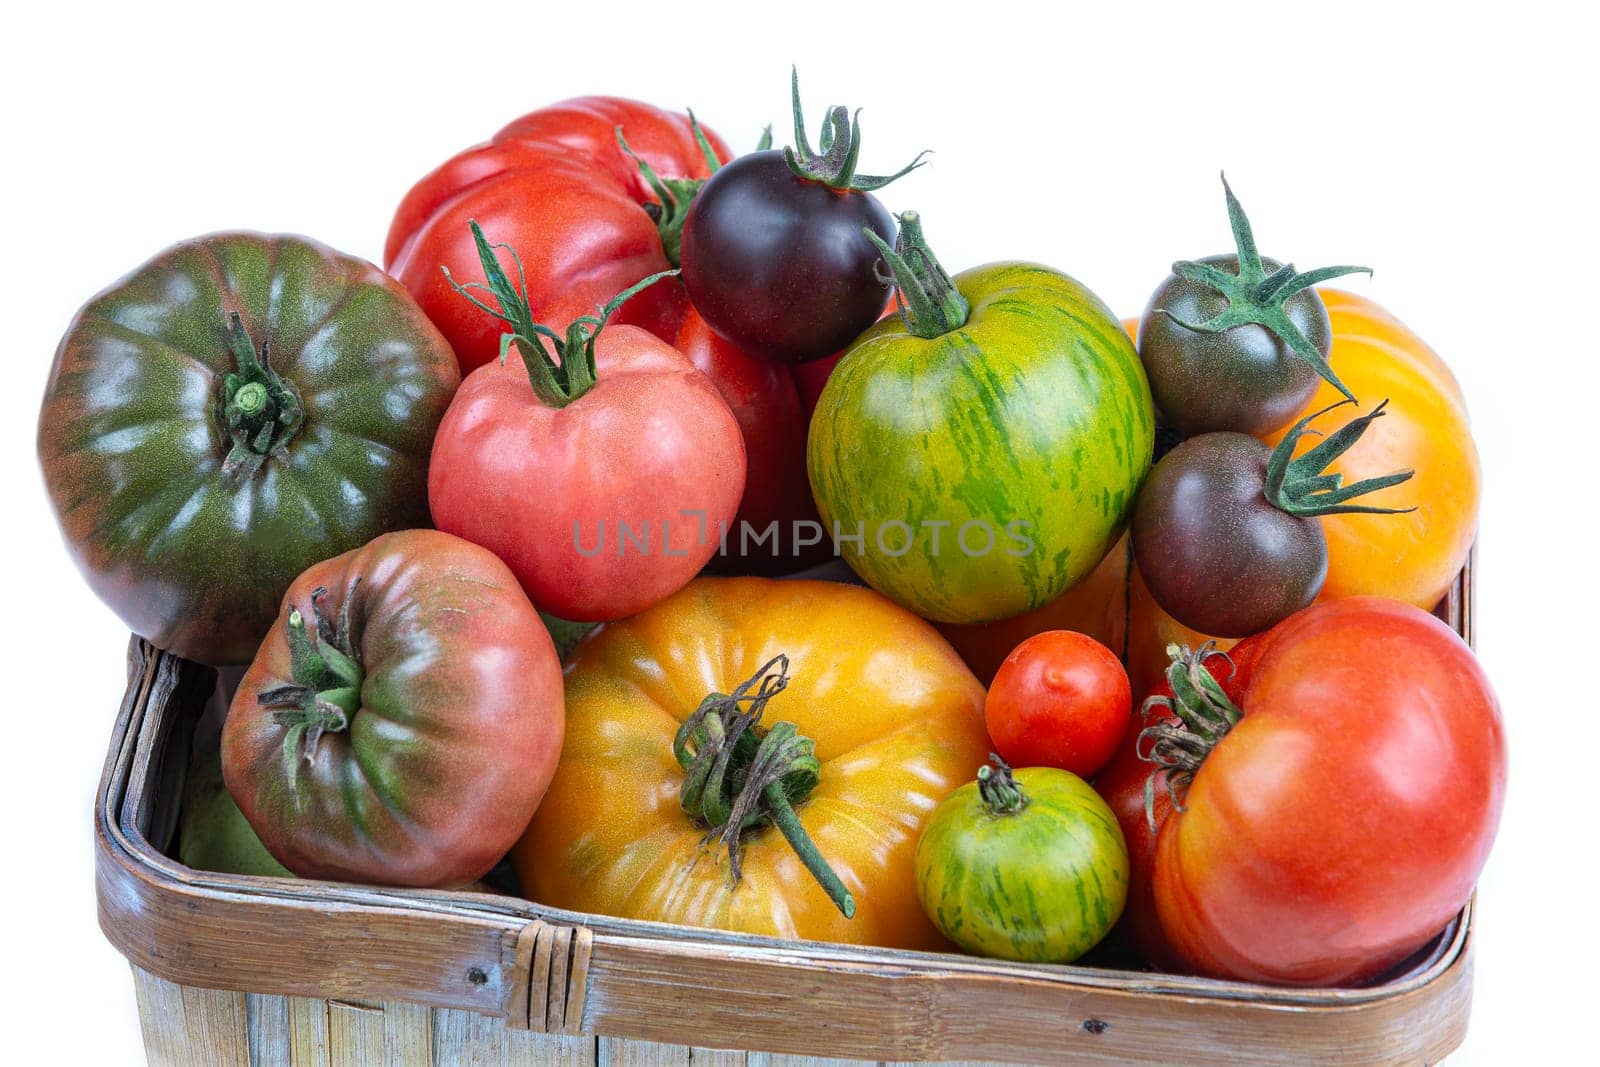 Basket full of freshly harvested heirloom and heritage tomatoes over white backgrond Multicoloured, red, green, black, purple, orange and yellow tomatoes ready to eat by JPC-PROD